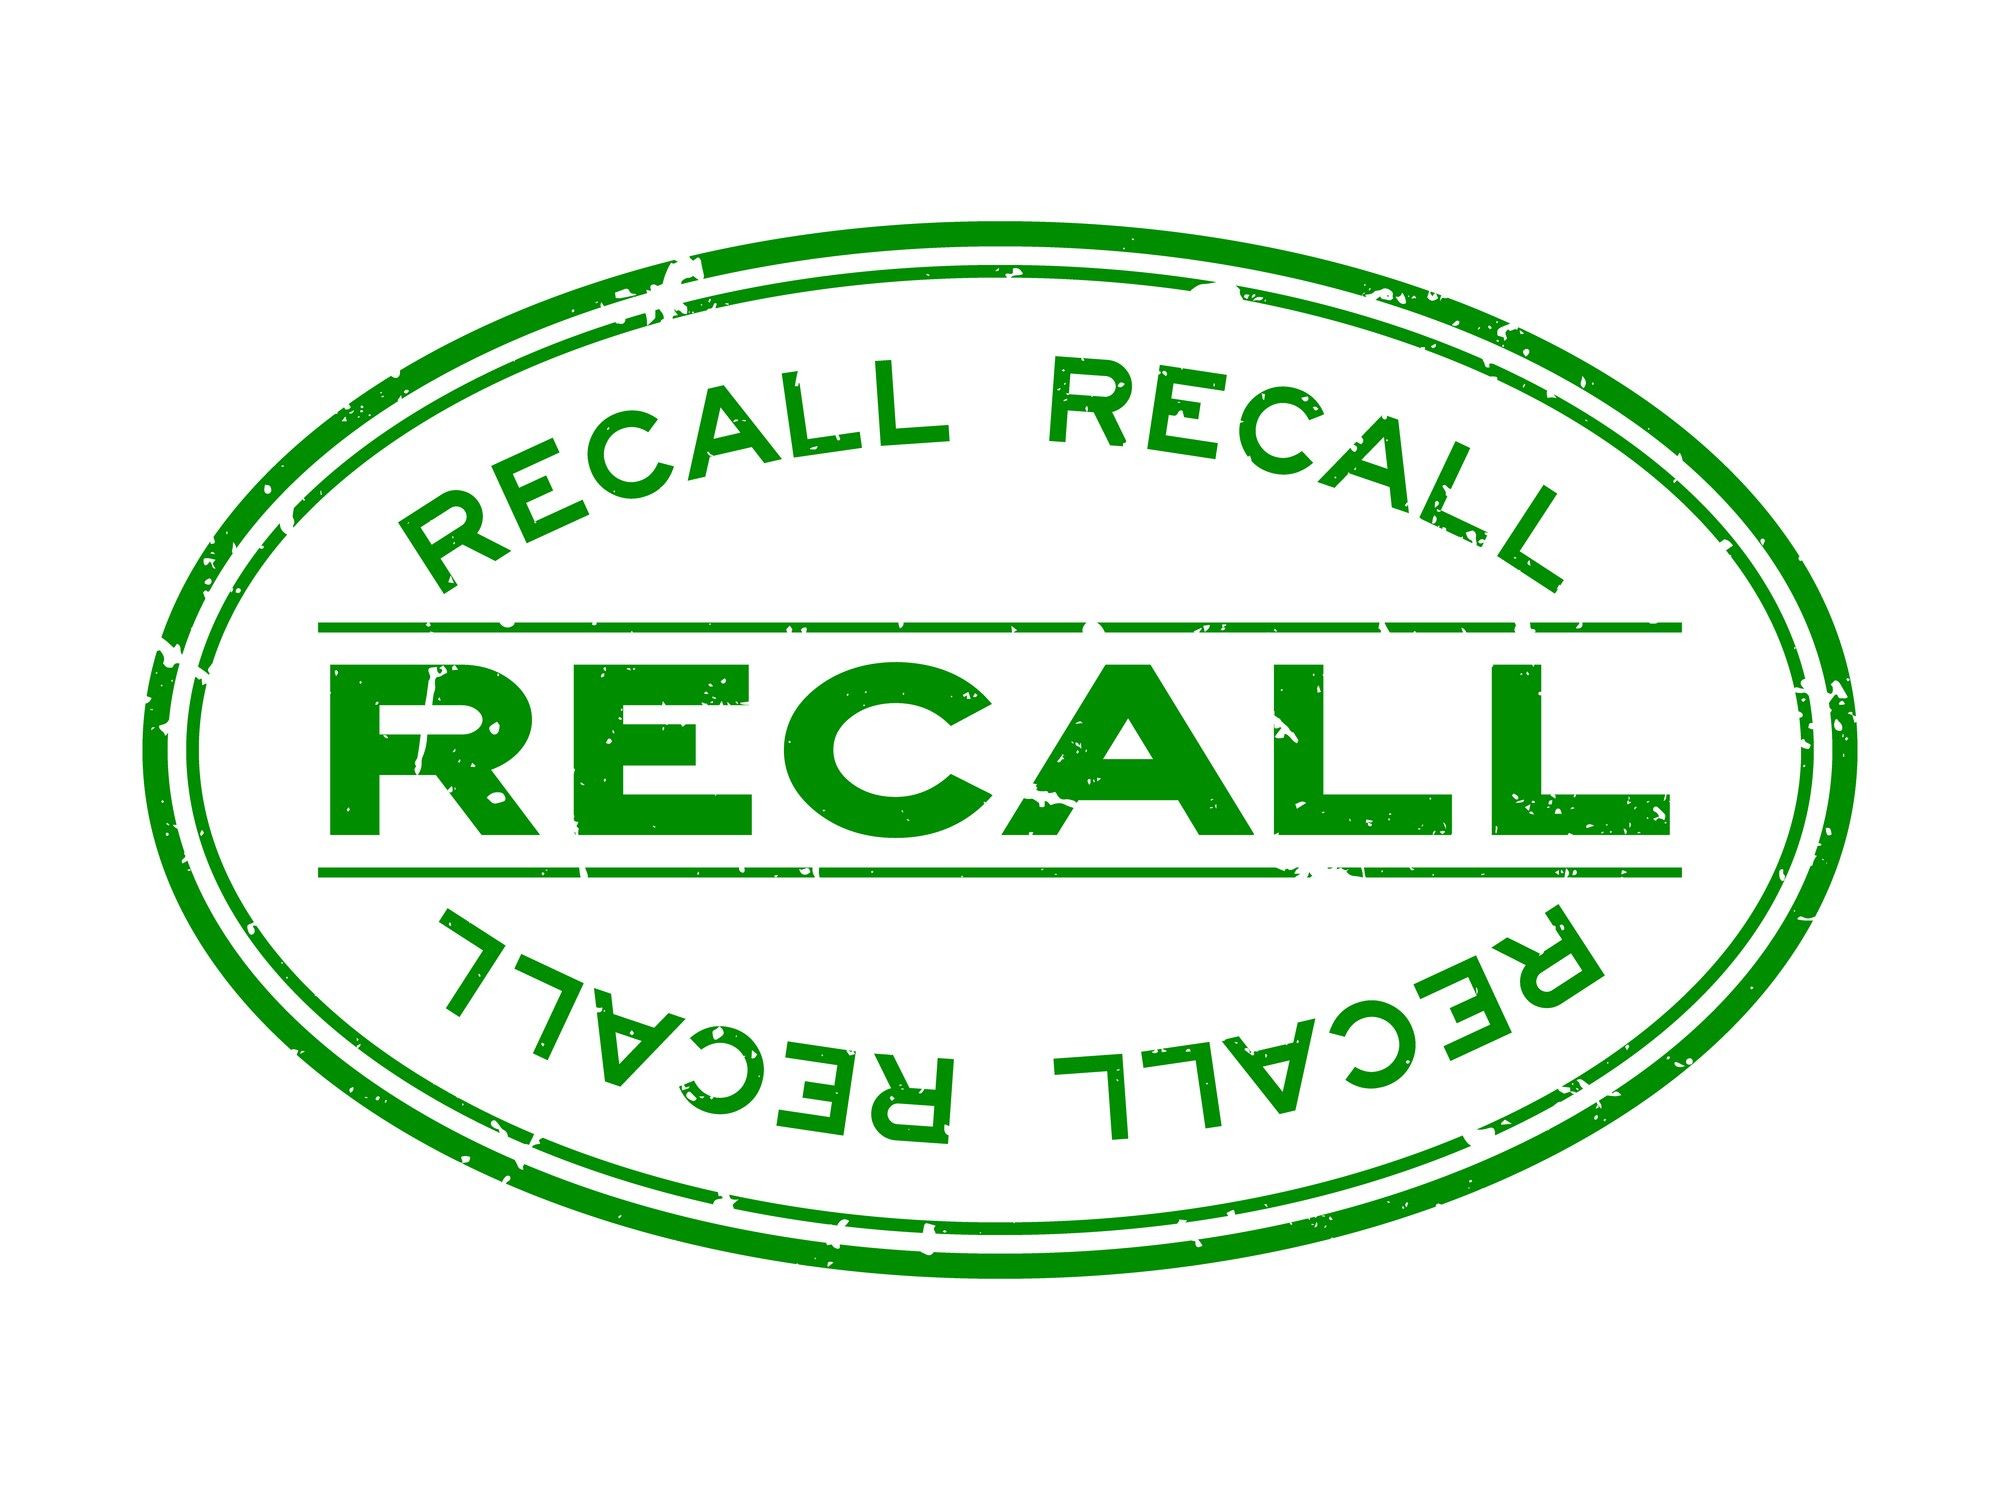 Concerns over salmonella contamination trigger voluntary recall of some dried spices.